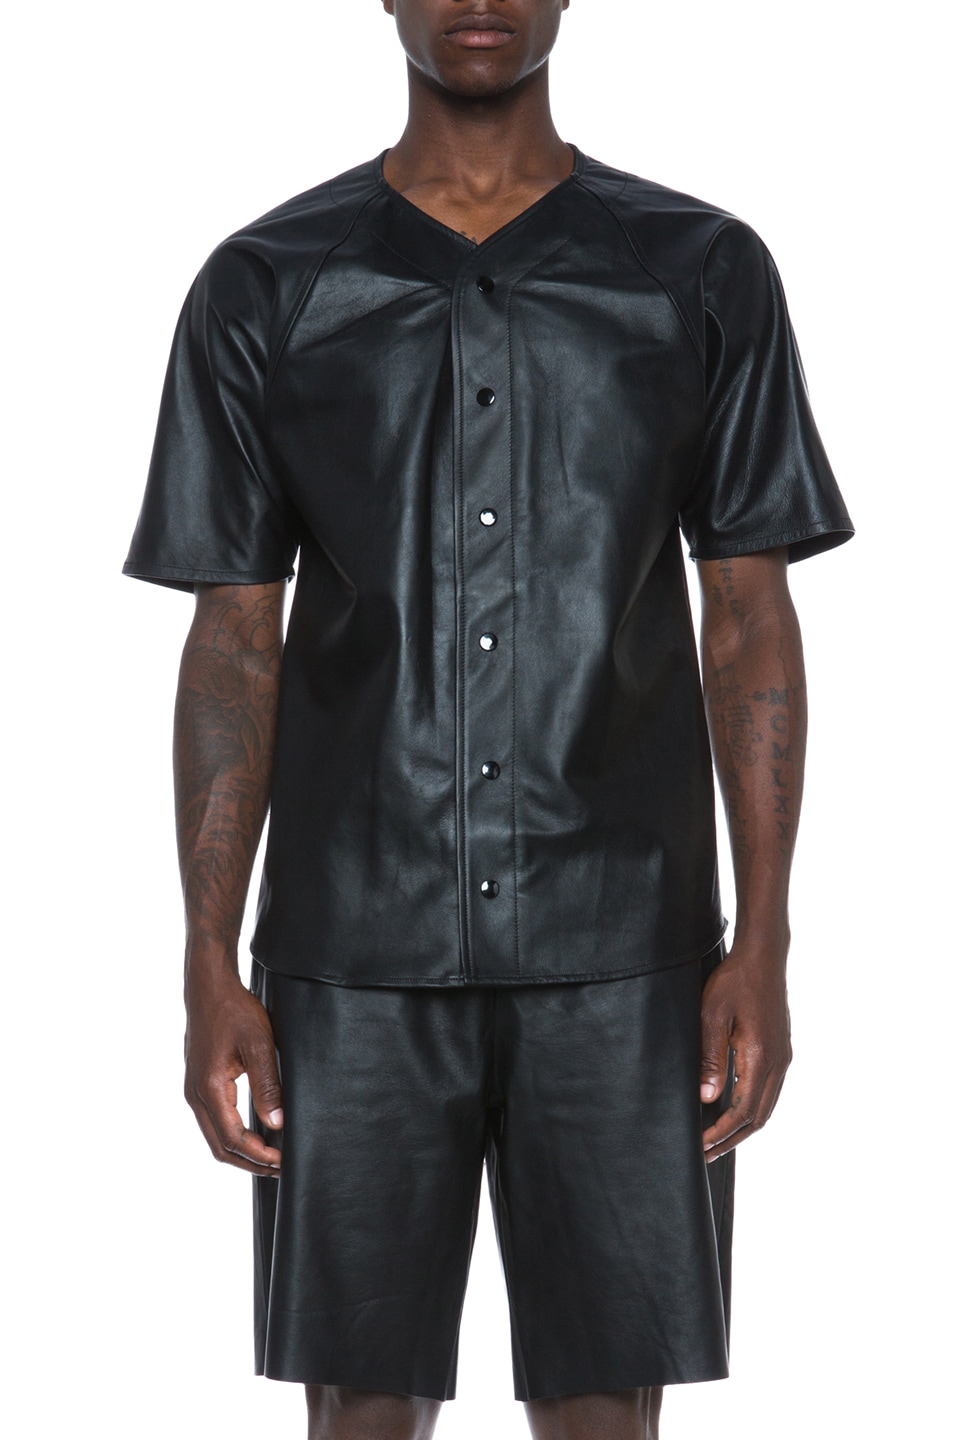 Laer Leather Baseball Jersey in Black 